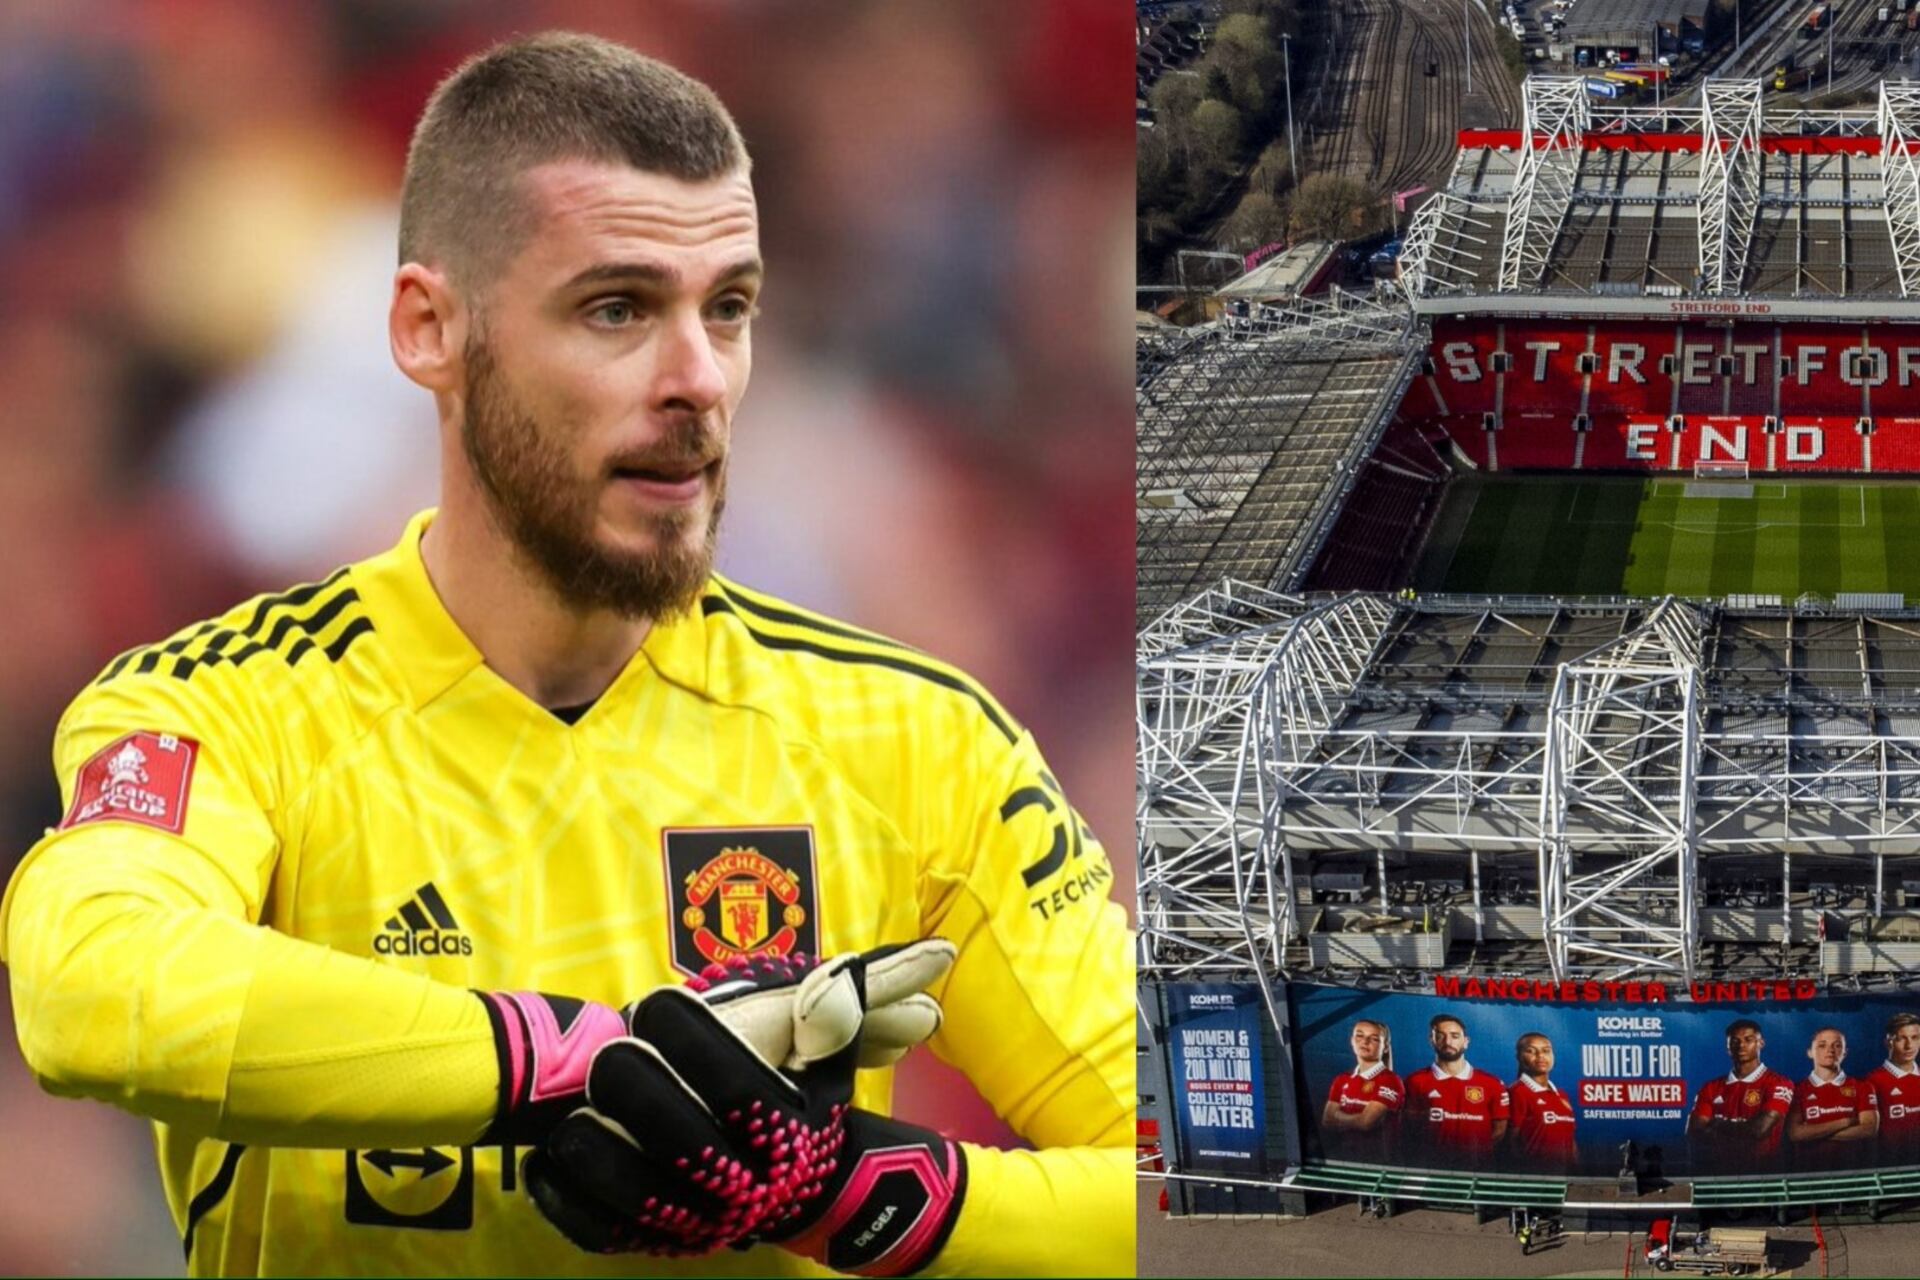 Not David De Gea, the former Manchester United player who decides to retire